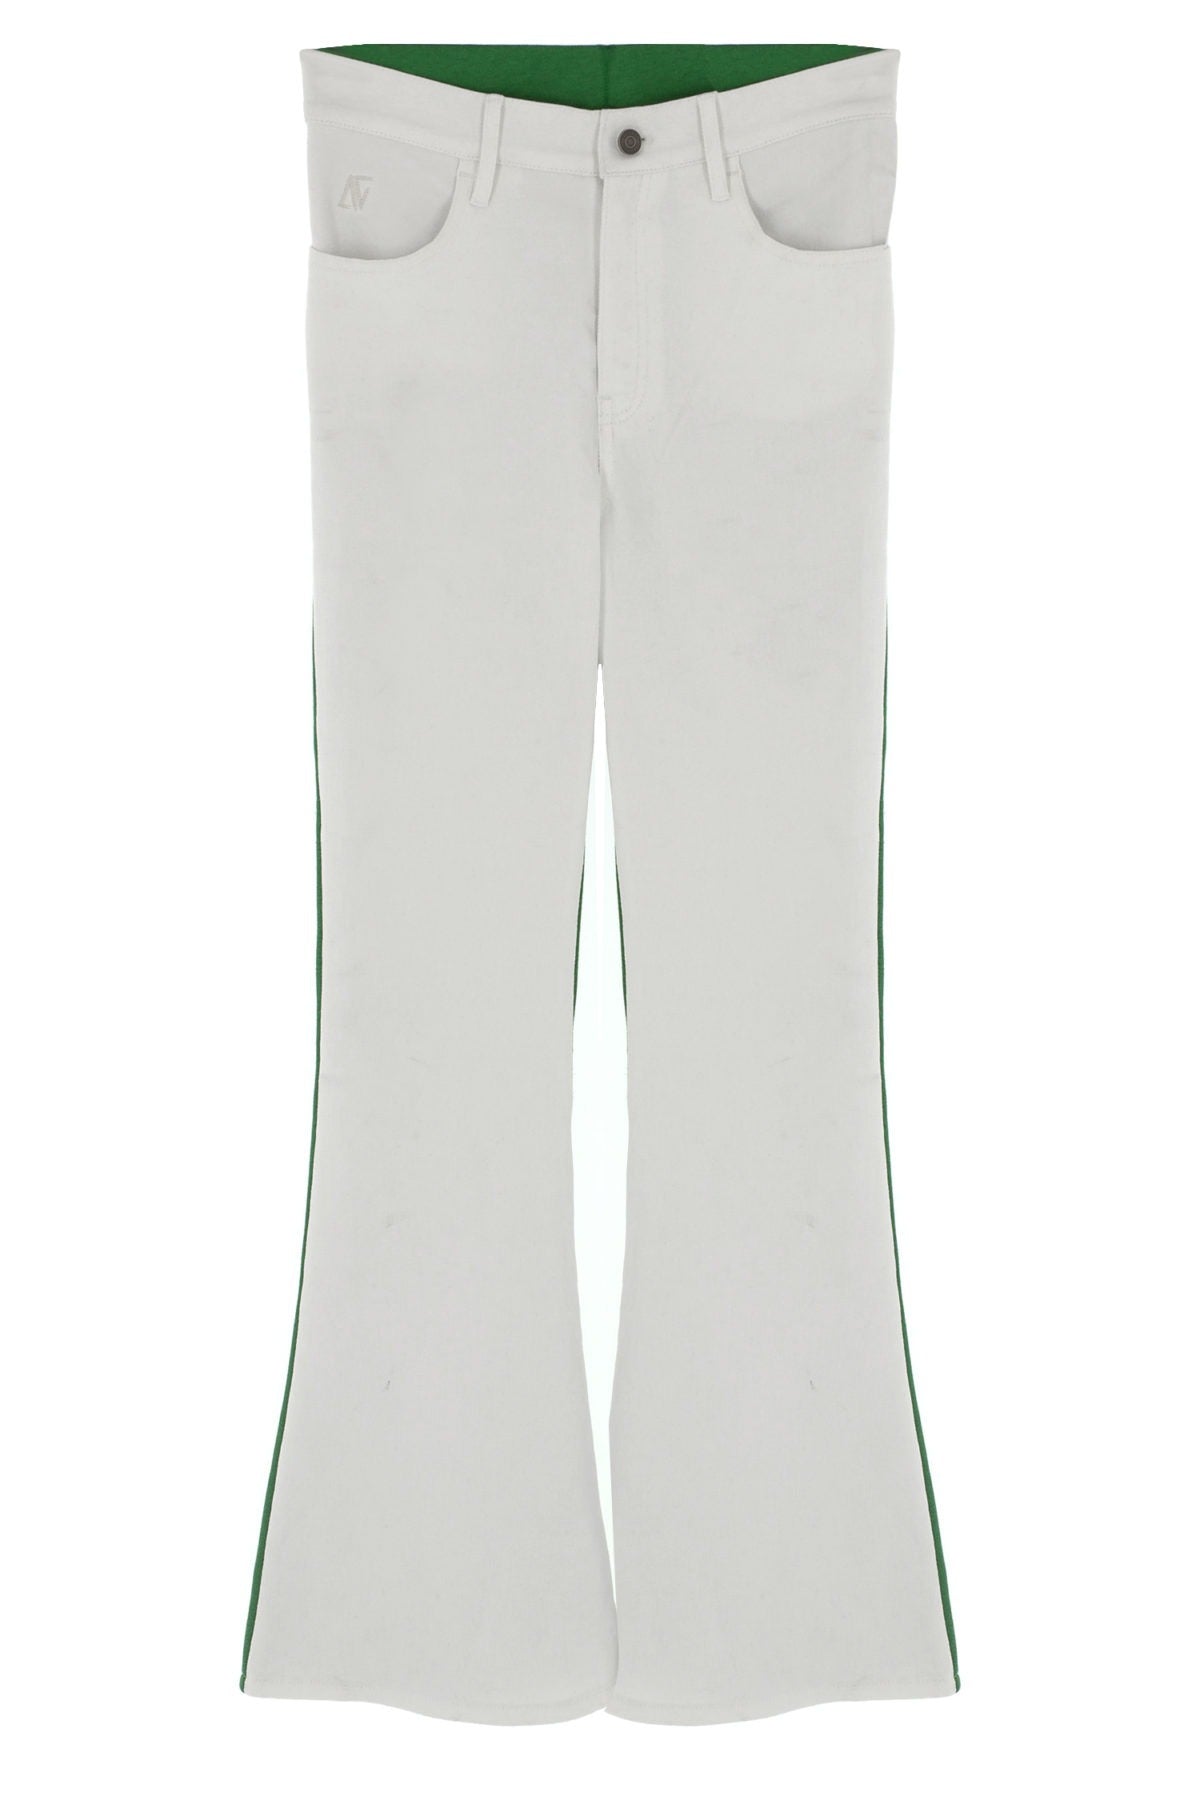 Load image into Gallery viewer, Flare Jean Sweatpants - Verdant White
